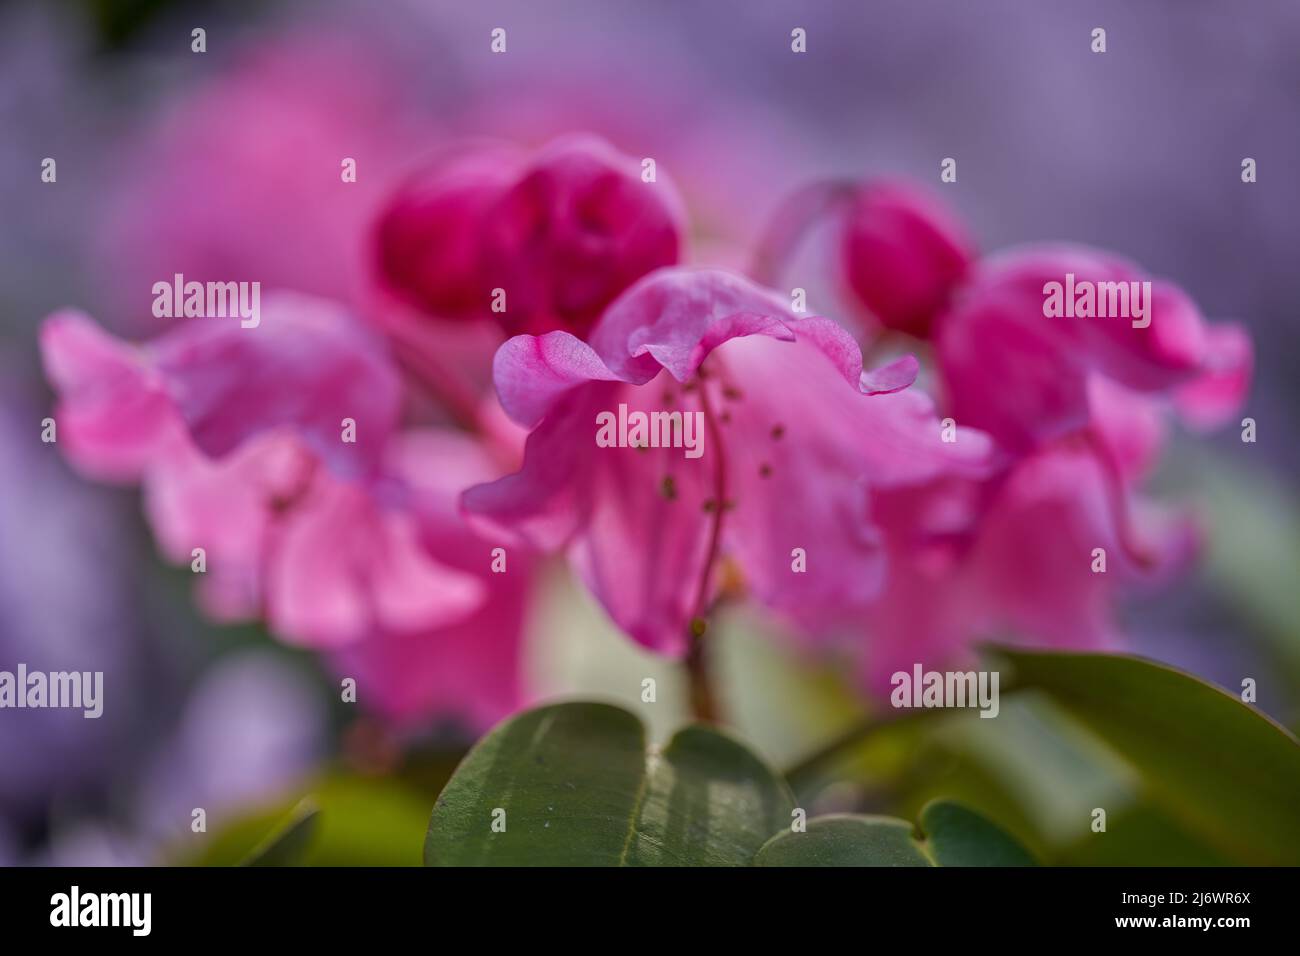 Lush,colorful pink Rhododendron orbiculare  blossom flowers close up Stock Photo